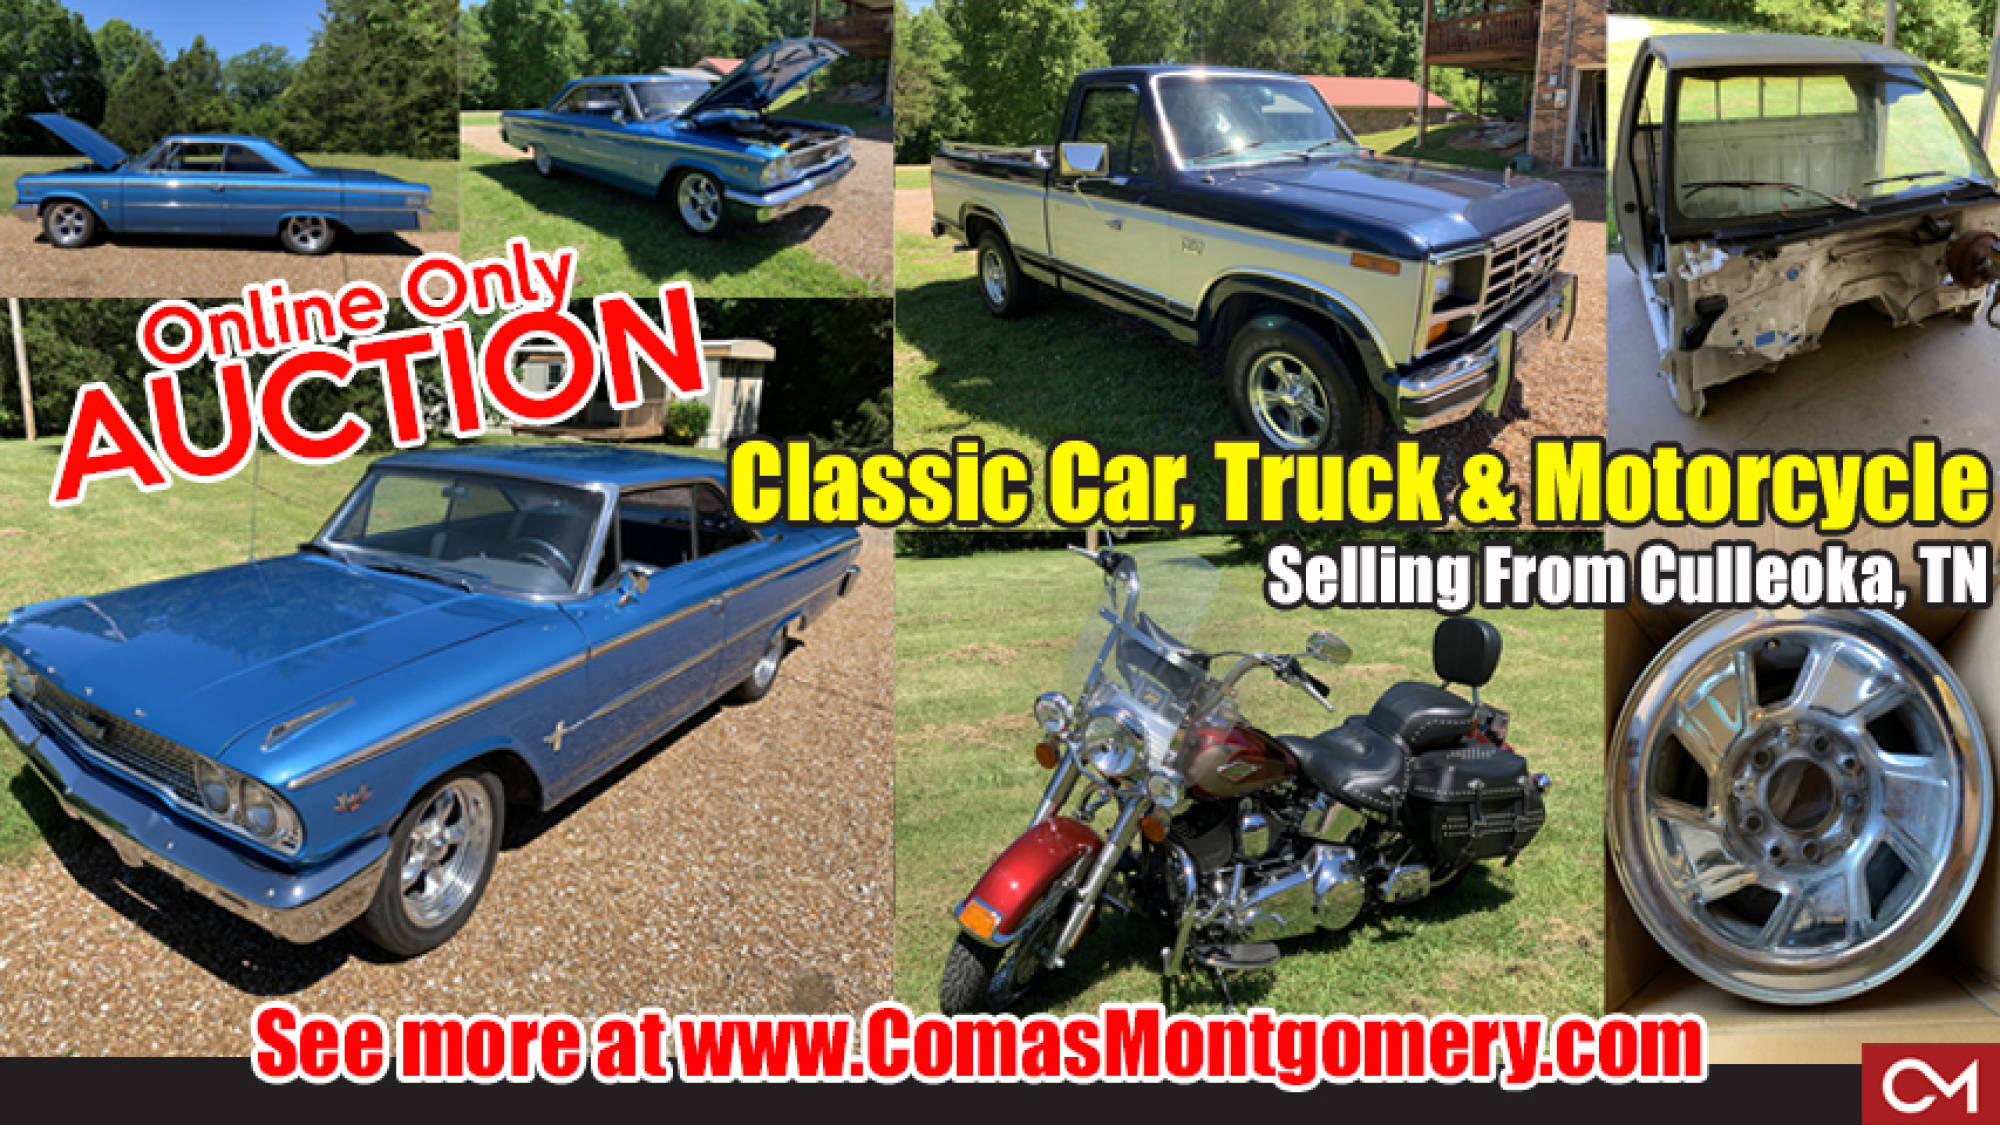 online, auction, classic, car, automobile, for sale, harley, davidson, ford, galaxie, truck, collectible, motorcycle, culleoka, tennessee, comas, montgomery